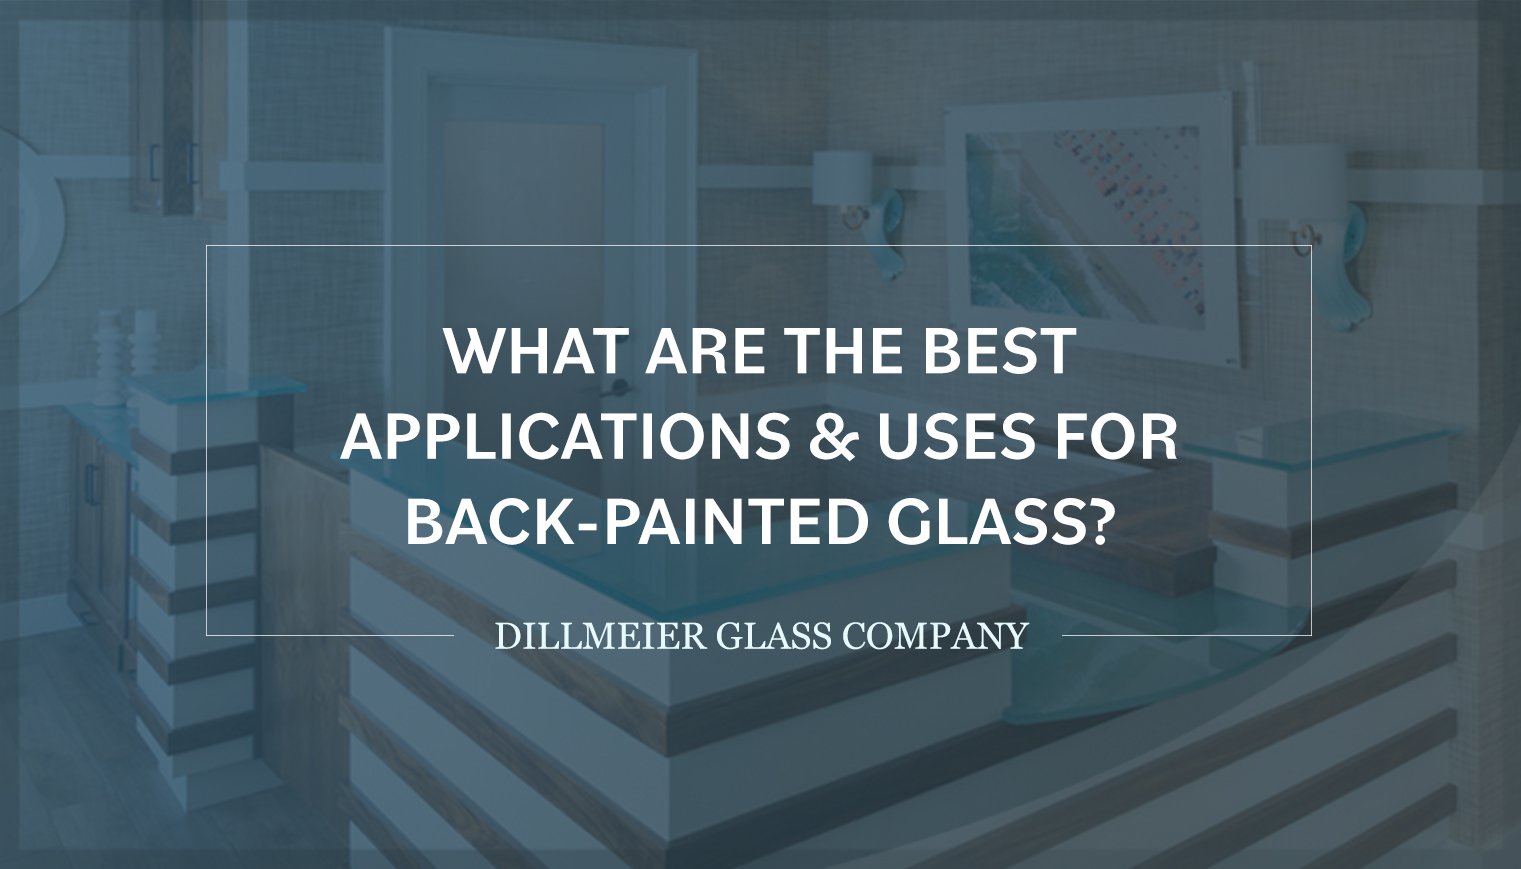 What Are the Best Applications & Uses for Back-Painted Glass?